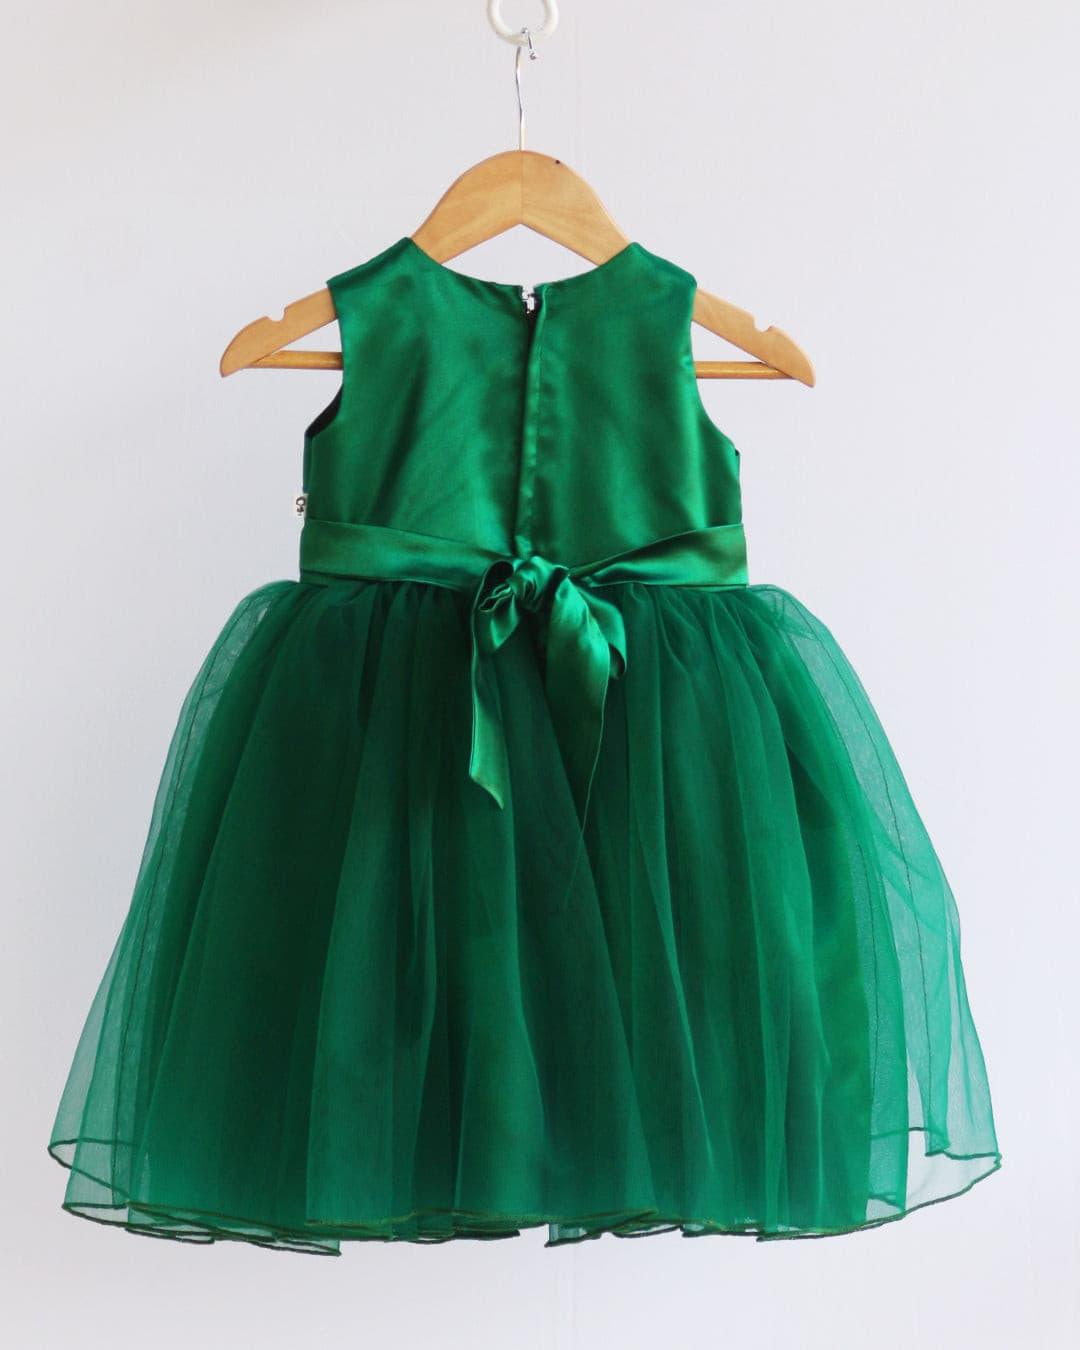 Bottle Green Handwork Sleeveless Knee length Frock
Material: Bottle green nylon mono net with handwork on neck and yoke side. Premium matching colour ultra satin is used as lining. Inner portion is covered with prem